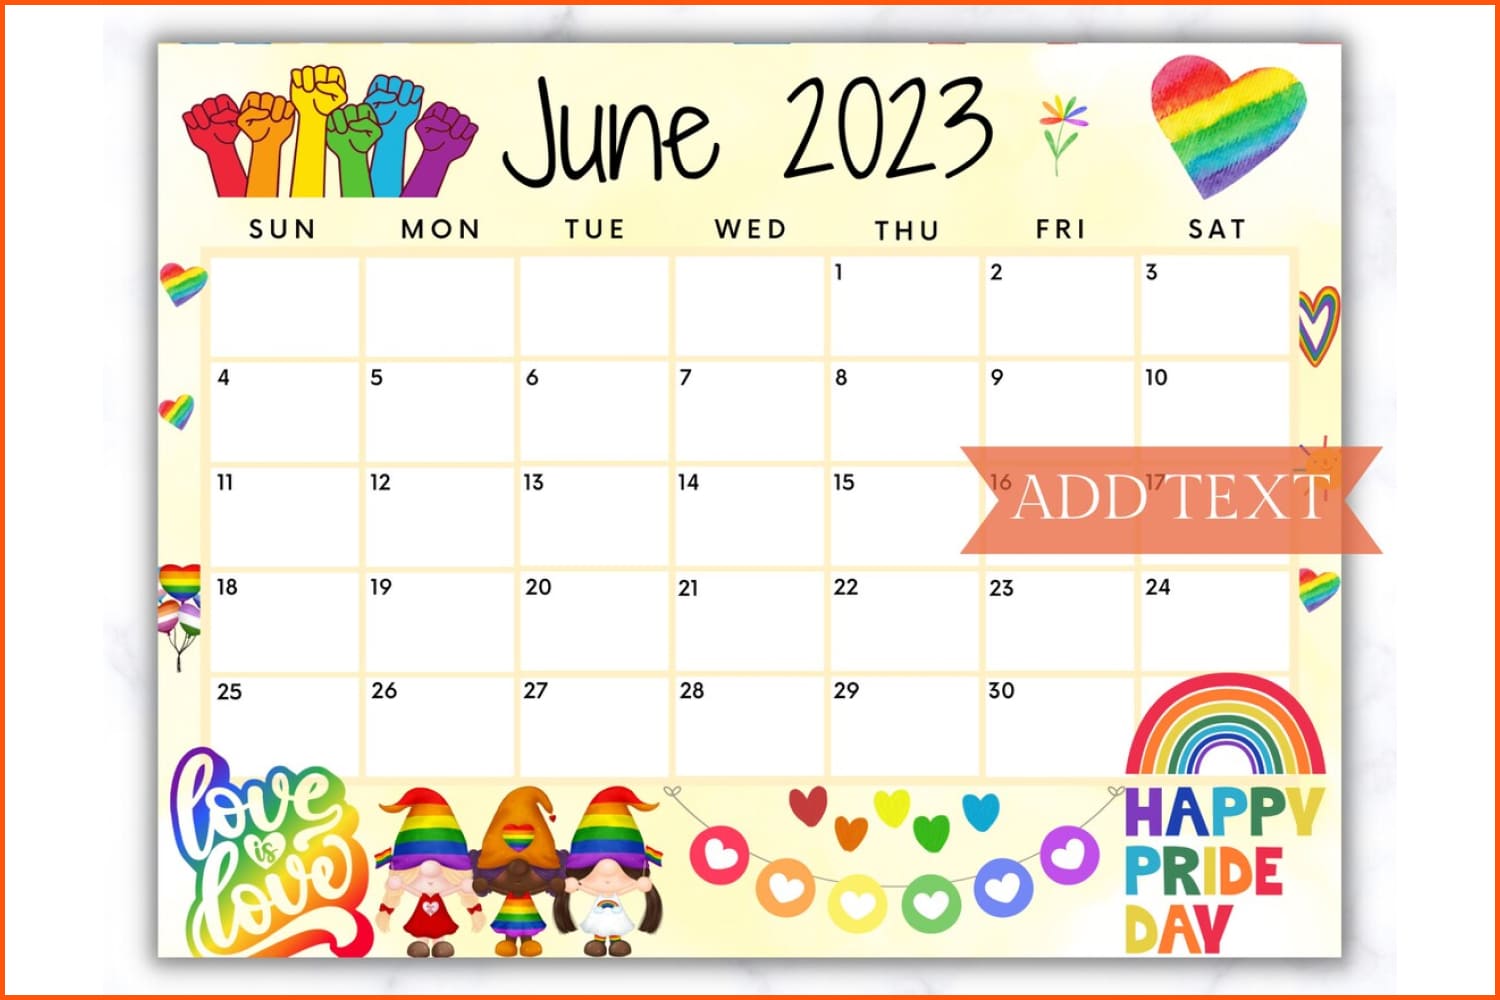 June calendar with gnome pattern and rainbow colored stickers.